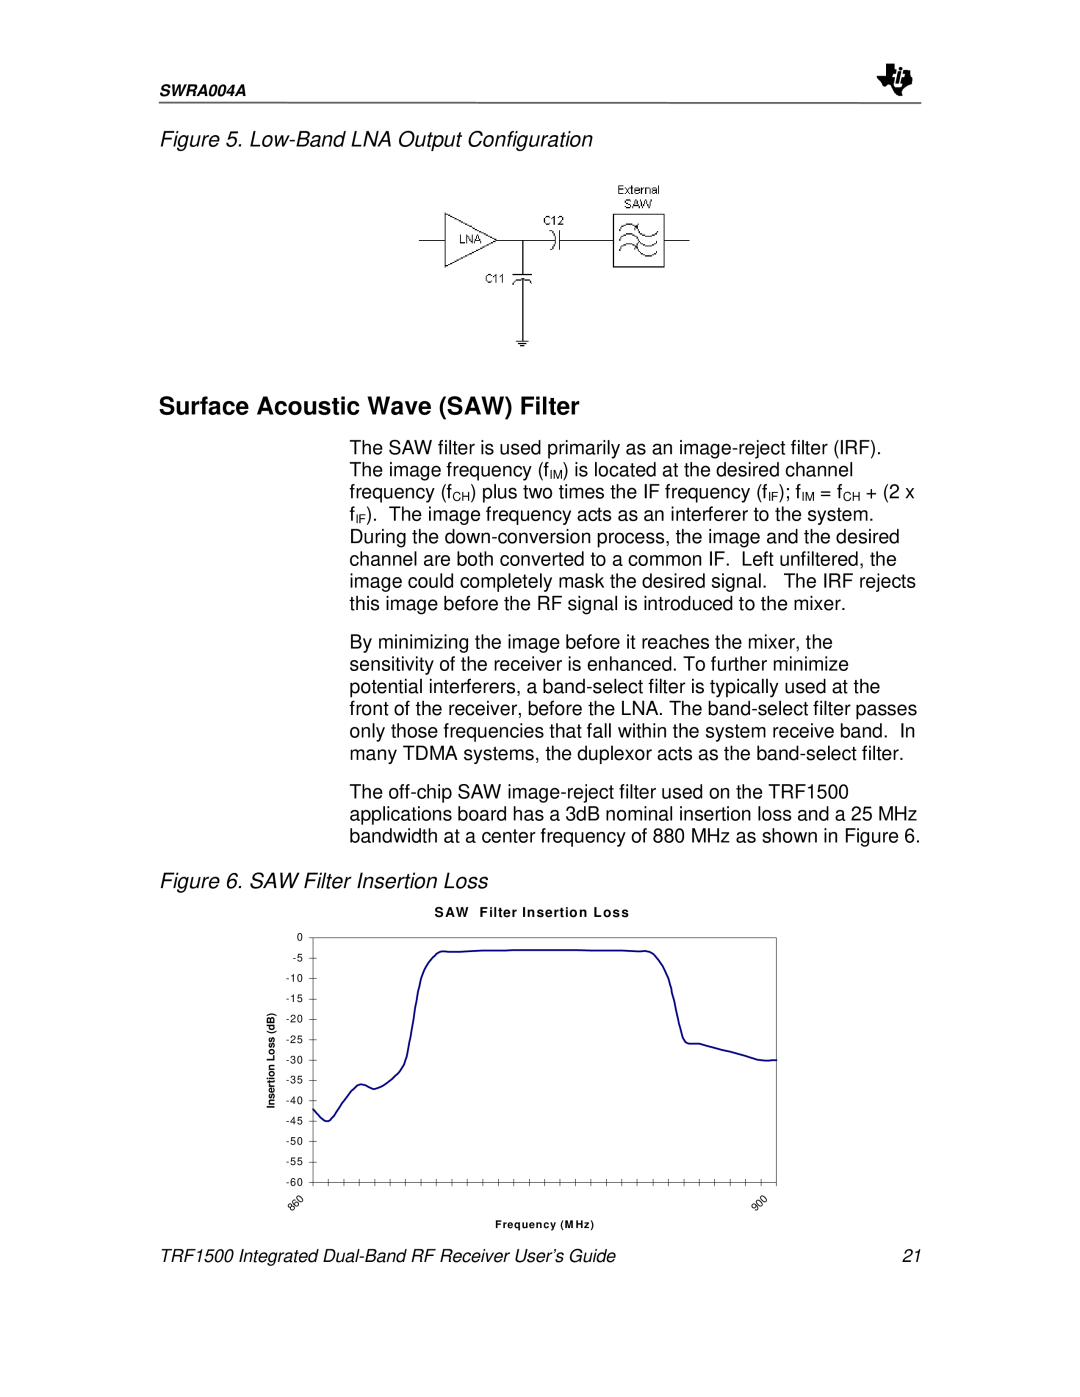 Texas Instruments TRF1500 Surface Acoustic Wave SAW Filter, Low-BandLNA Output Configuration, SAW Filter Insertion Loss 